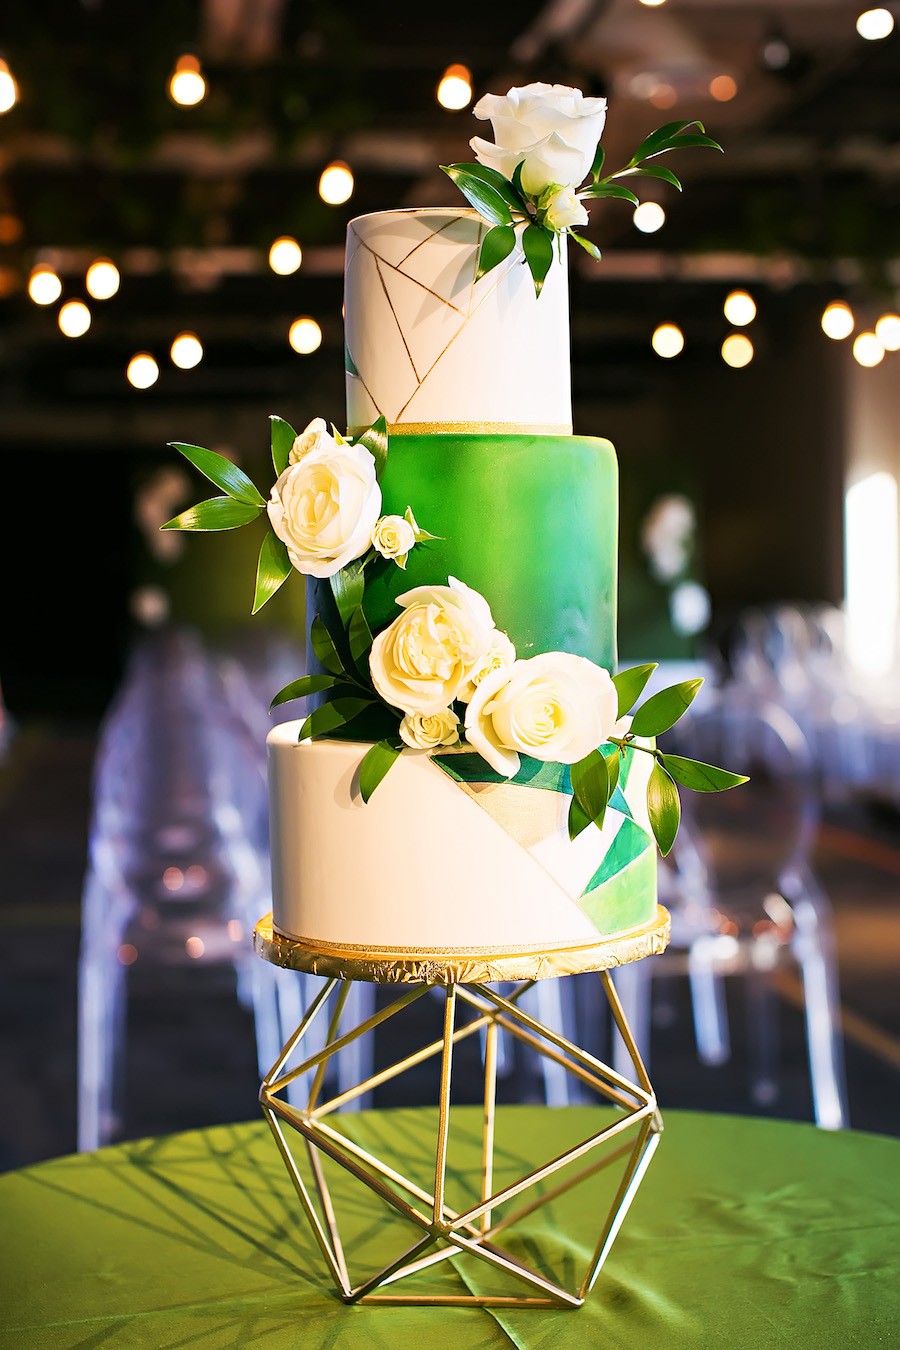 Green, White and Gold Modern Geometric Round Wedding Cake with Cascading Flowers | Tampa Bay Wedding Cake Baker The Artistic Whisk